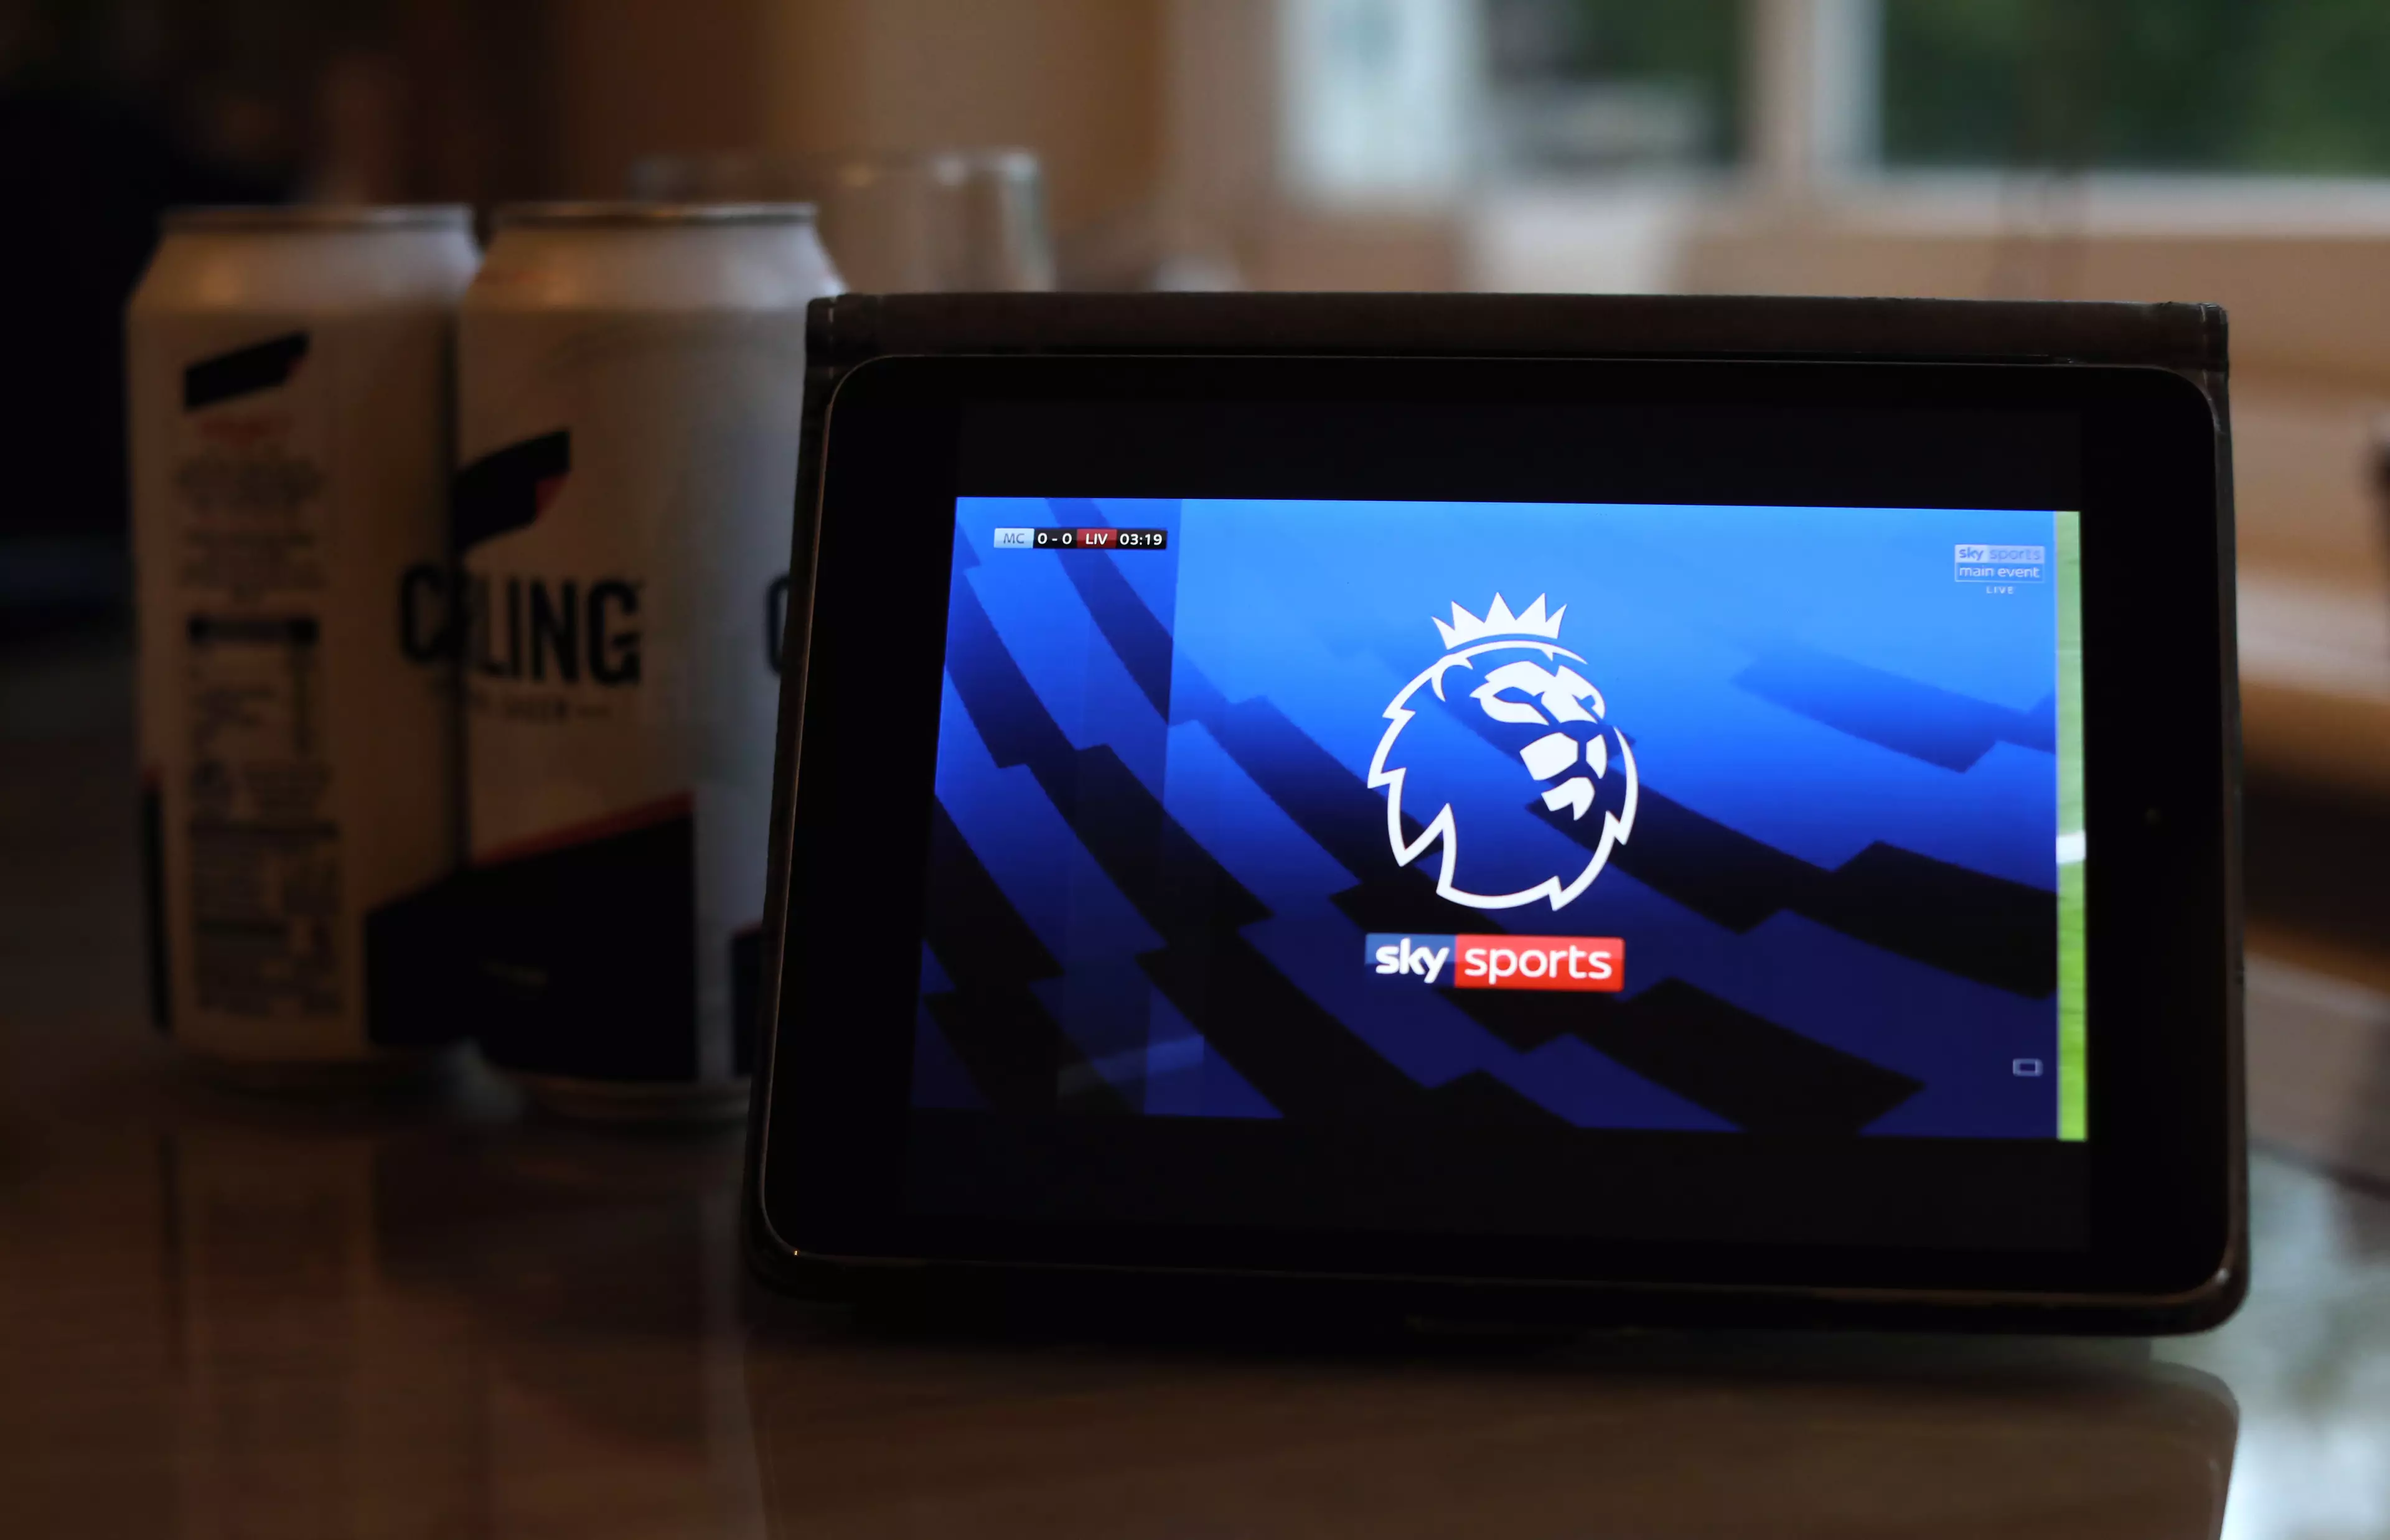 Could DAZN beat Sky Sports to the Premier League rights? Image: PA Images